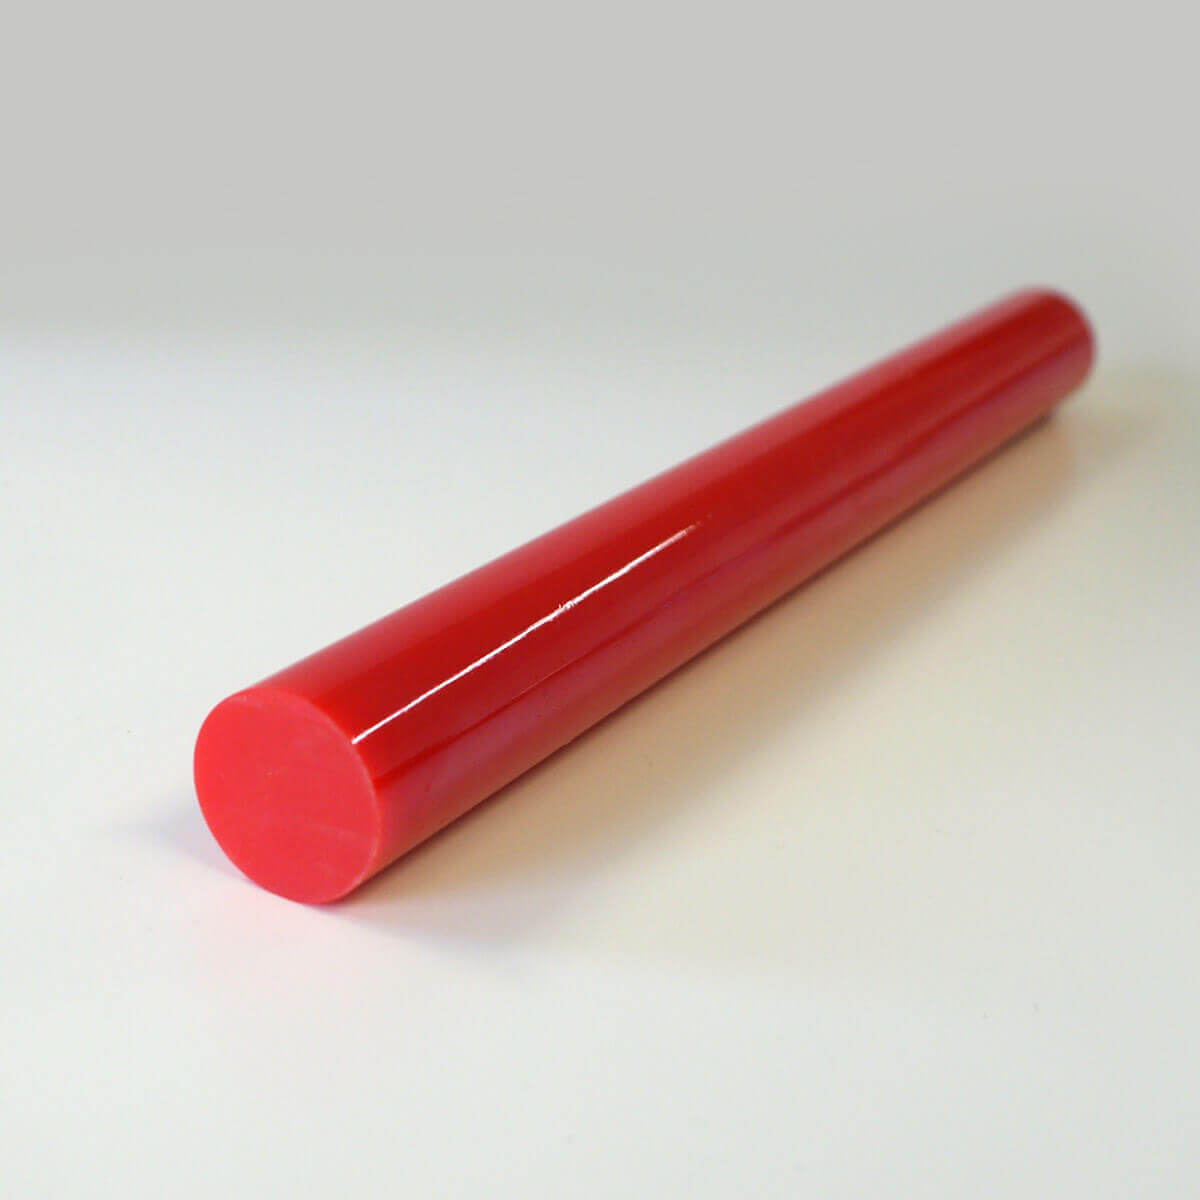 What can Polyurethane rods be used for?